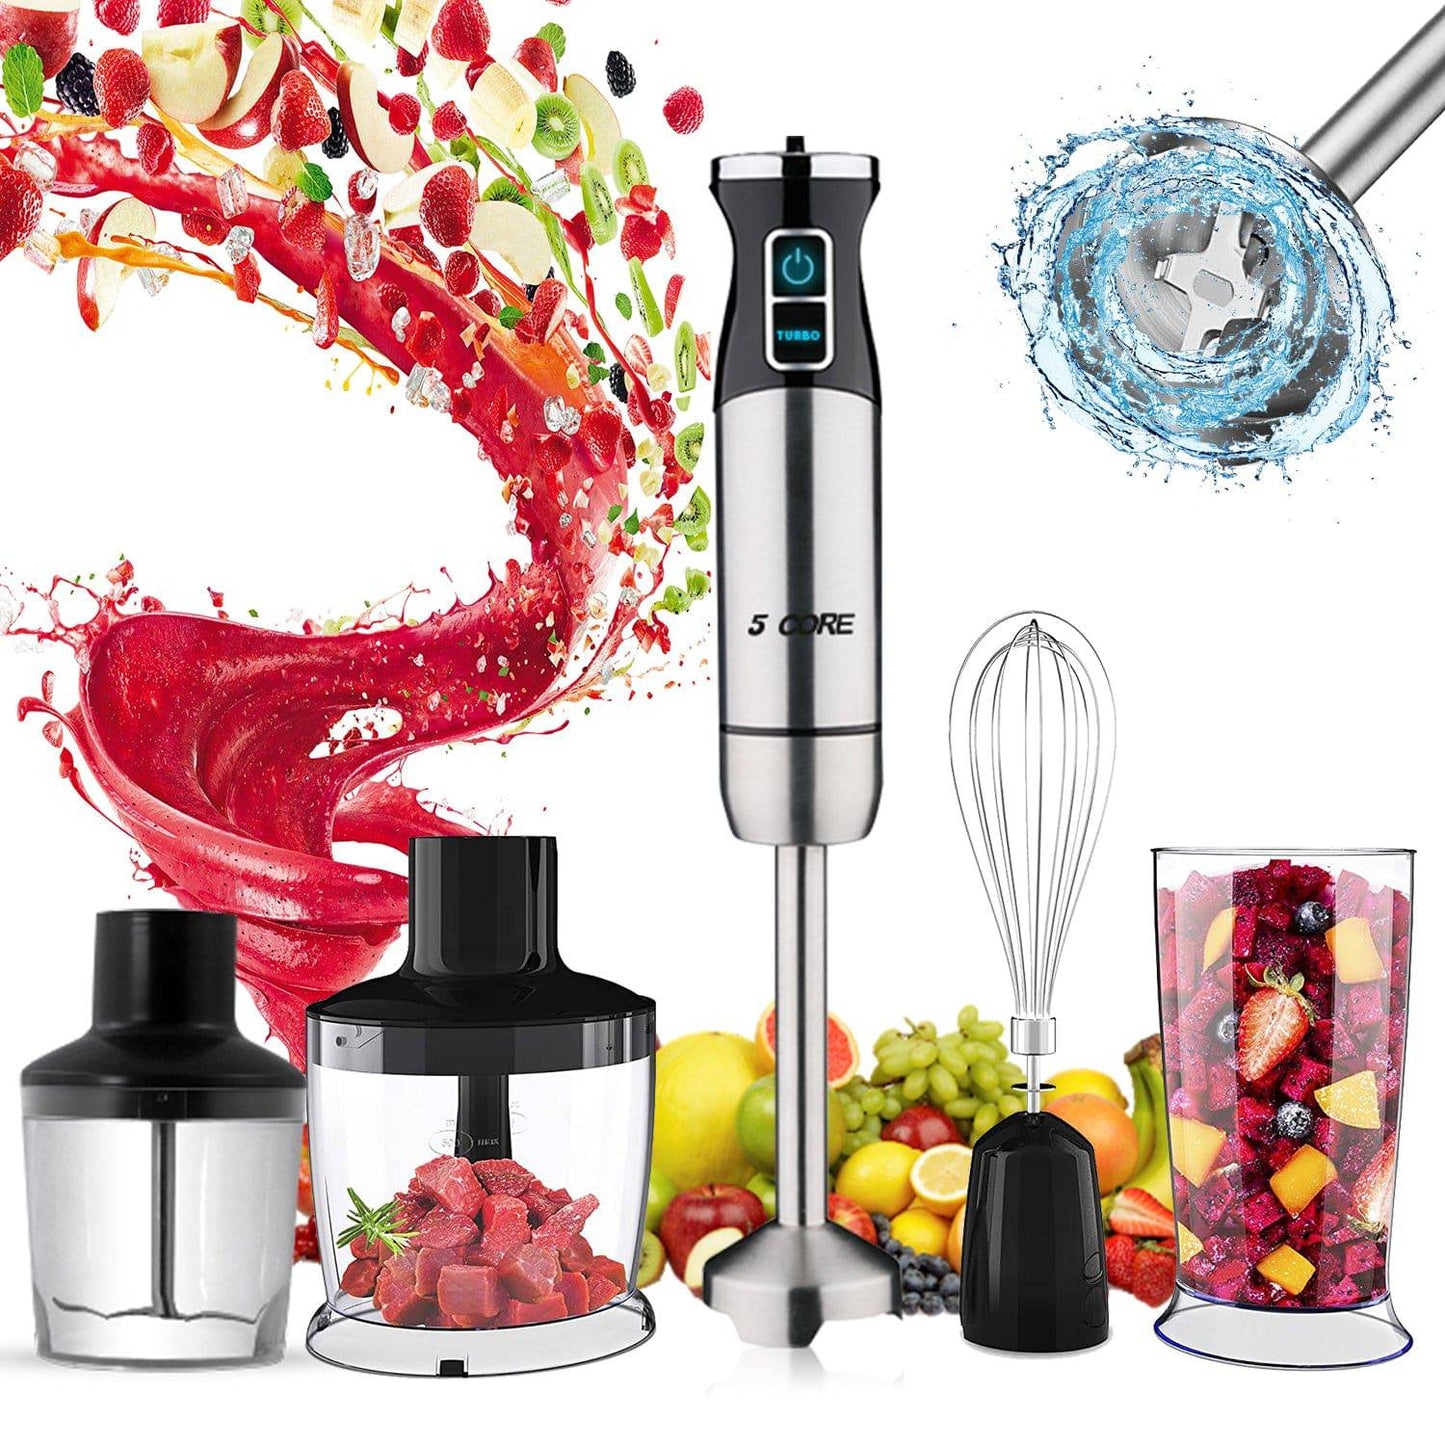 5 Core 5-in-1 Immersion Hand Blender, Powerful 500W Motor- 8 Speed Handheld Stick Blender with 304 Stainless Steel Blades, BPA-Free Milk Frother, Smoothies, Egg Whisk, Puree Infant Food, Sauces and Soups HB 1520-0